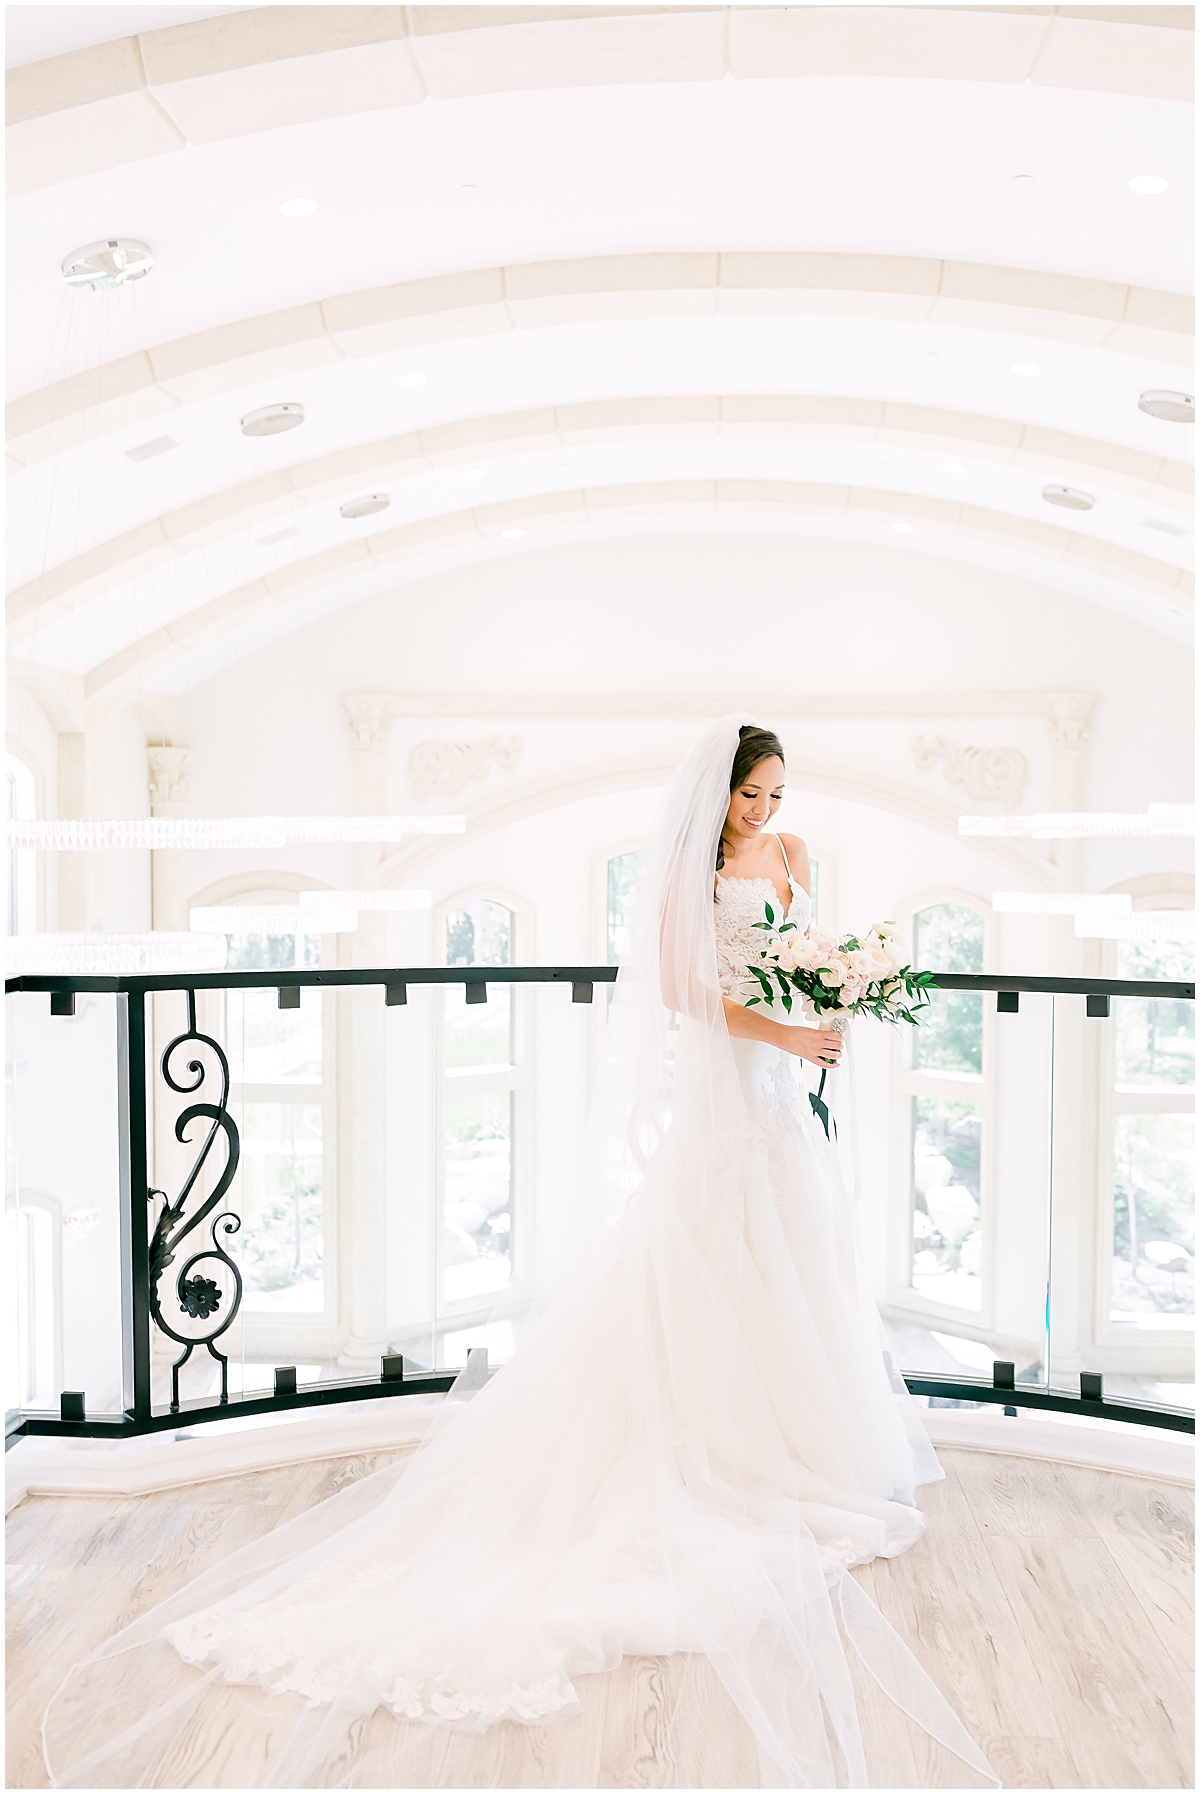 Bride portraits | Knotting Hill Wedding Little Elm Texas Photography by Mary Talamantes